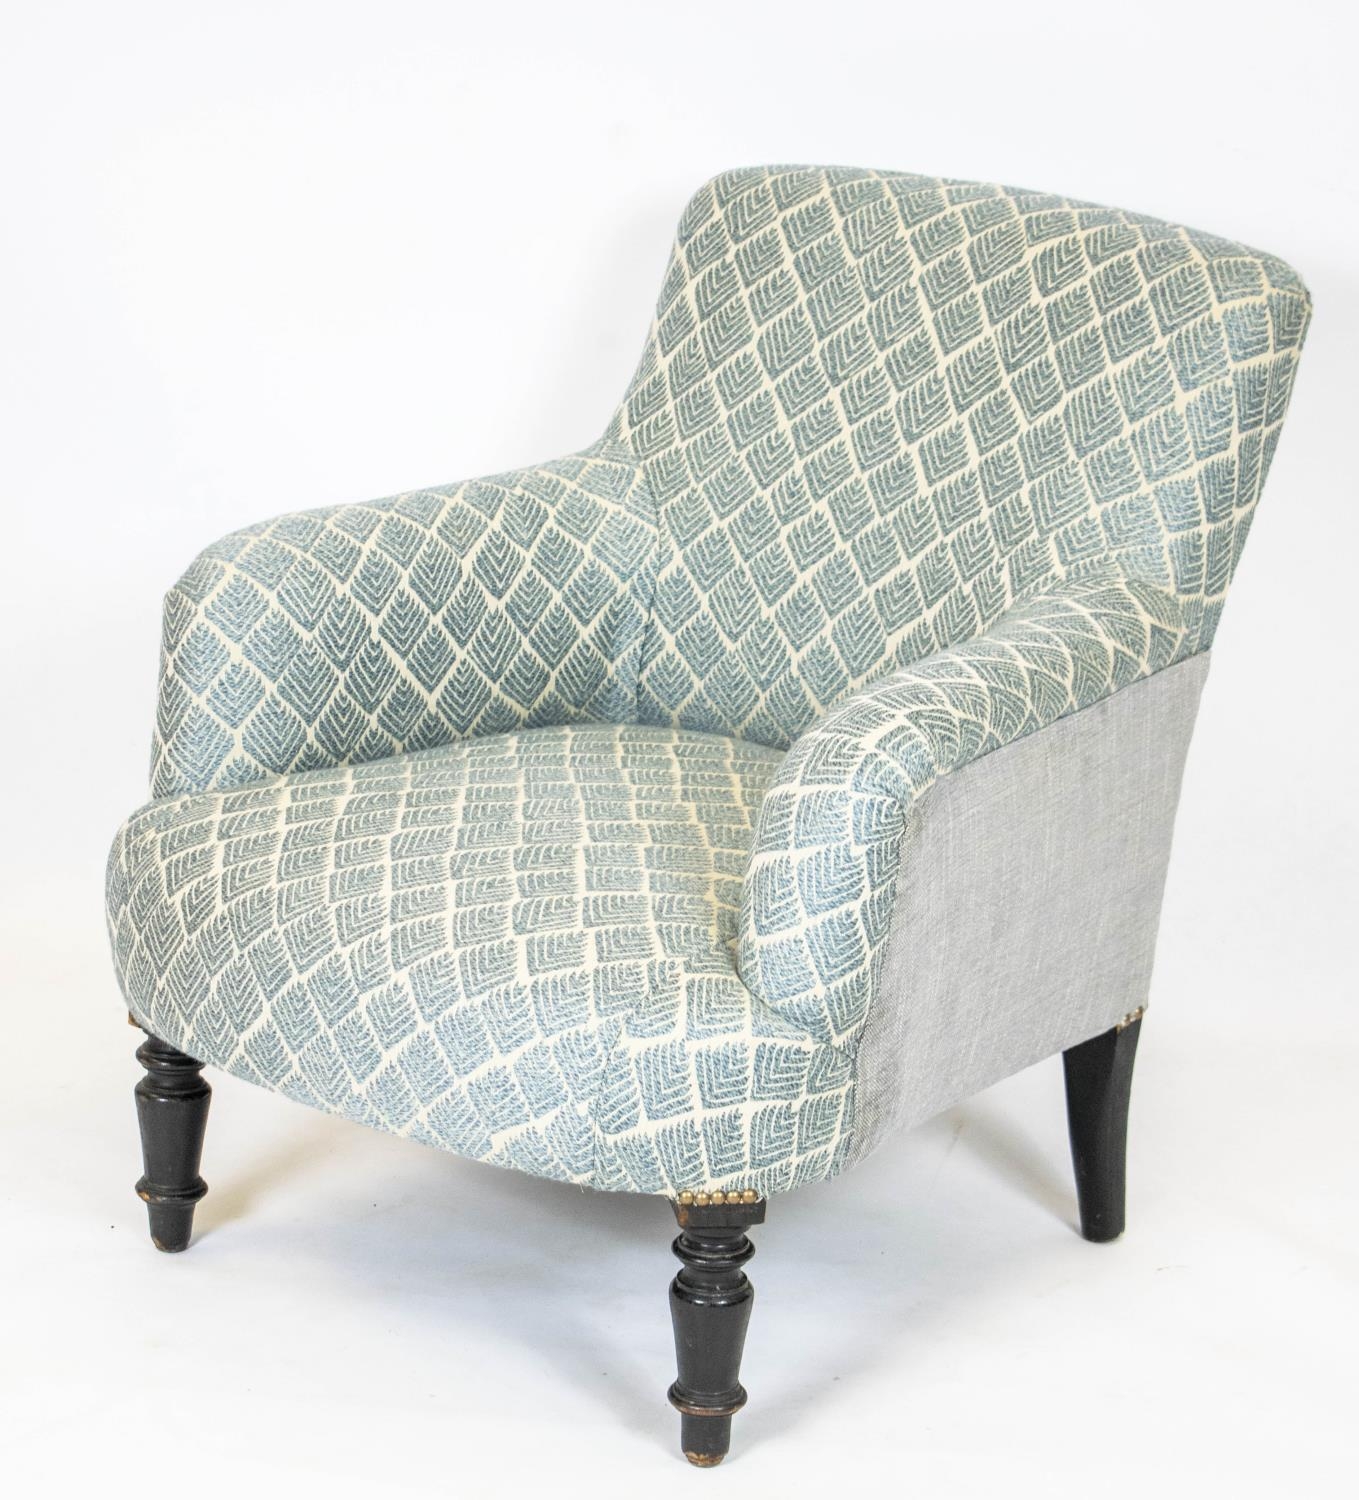 ARMCHAIR, 73cm H x 68cm, Napoleon III ebonised in Guy Goodfellow patterned fabric.